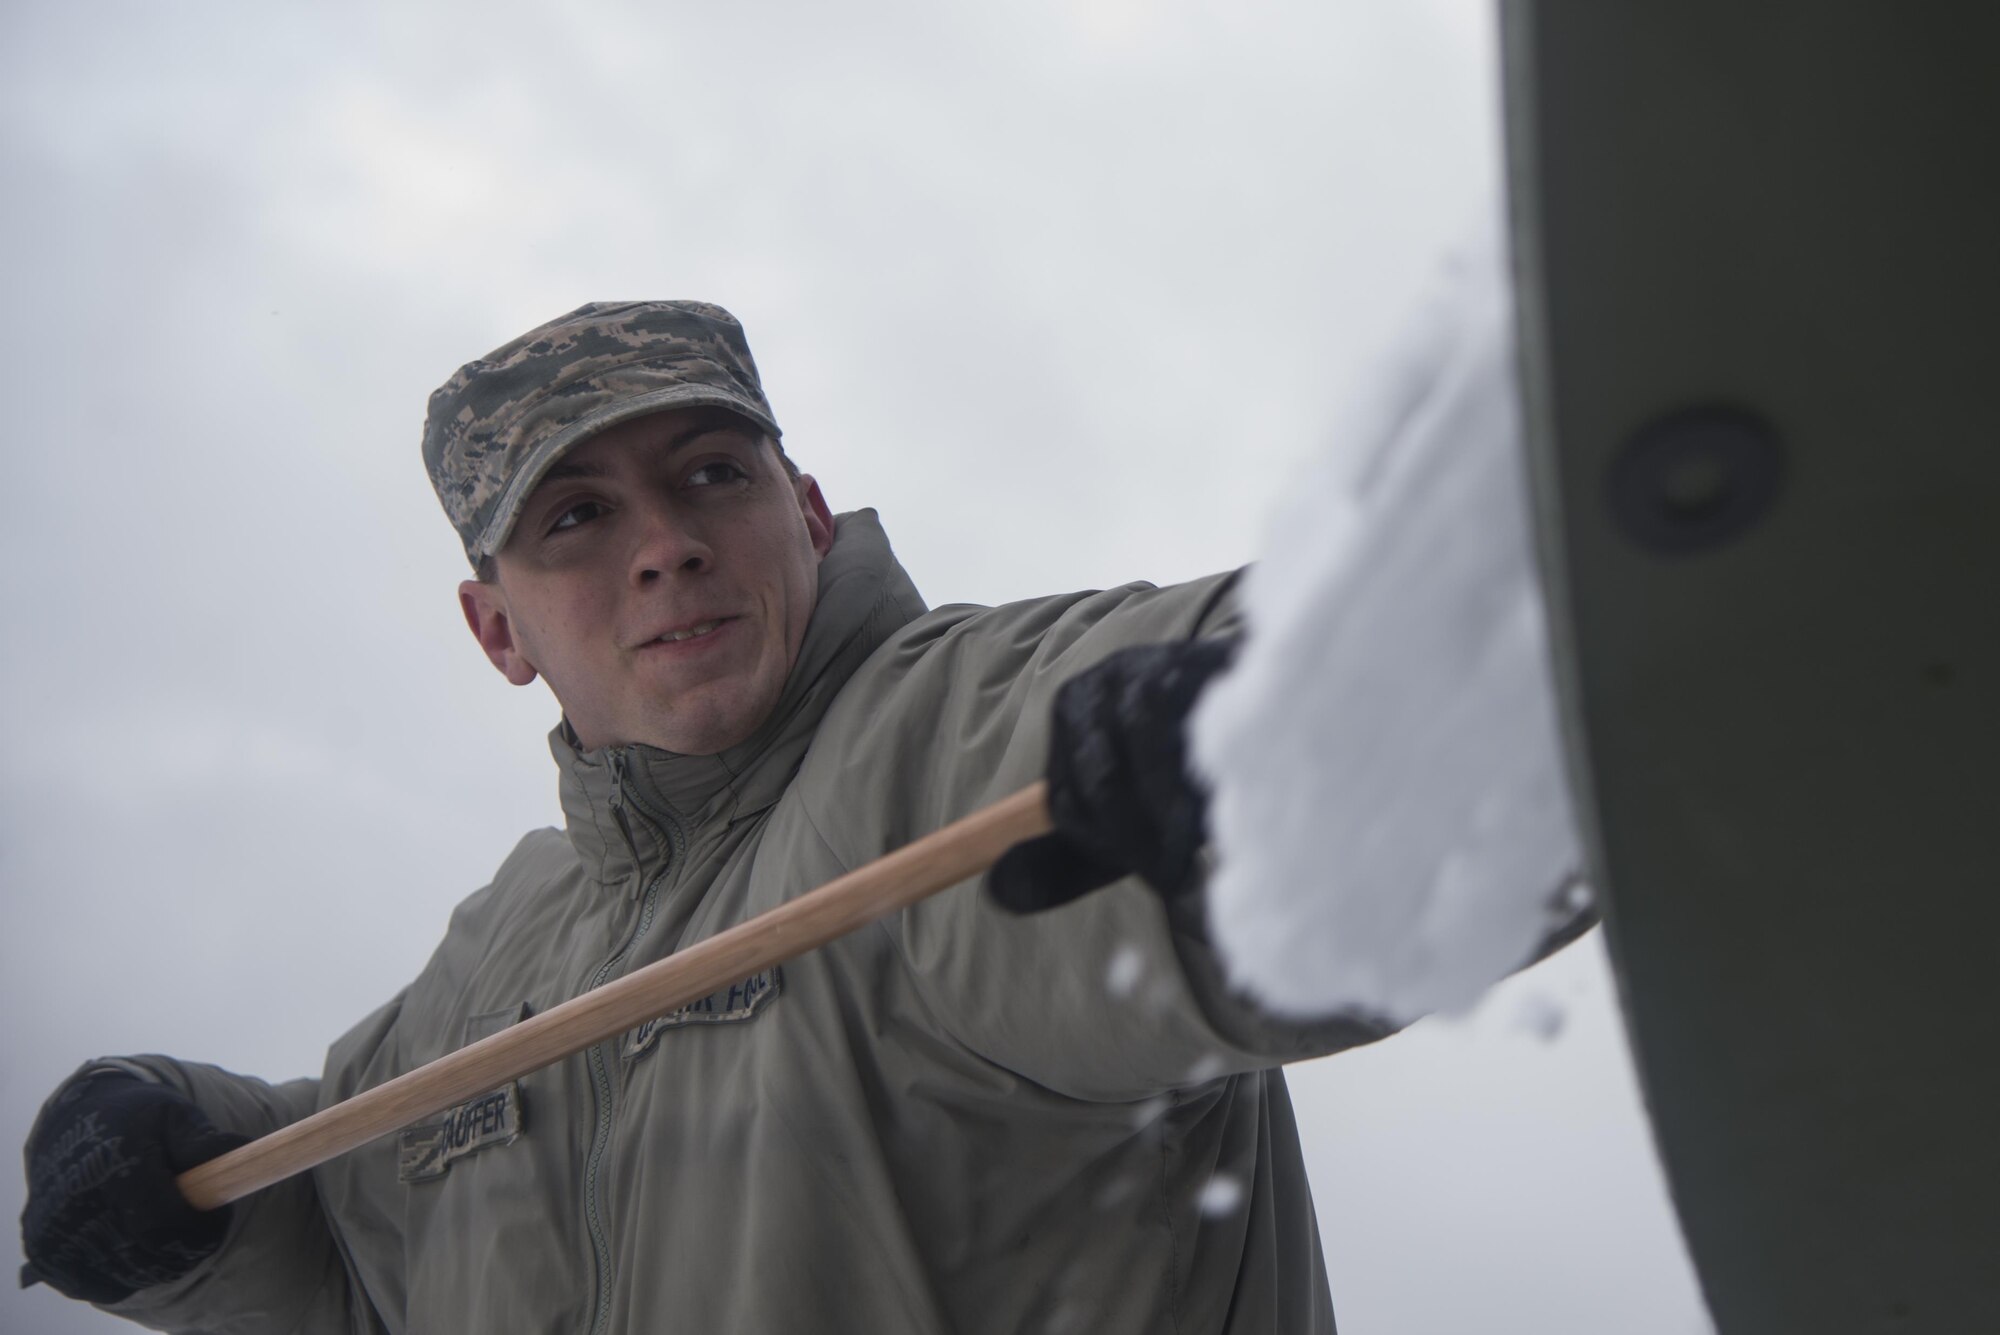 Senior Airman Erik Stauffer cleans snow off of a satellite during exercise Juniper Thunder Jan. 30, 2015, at Ramstein Air Base, Germany. Juniper Thunder aimed to help the interoperability between Air Force and Army combat communications systems. Stauffer is a transmissions systems technician assigned to the 1st Combat Communications Squadron. (U.S. Air Force photo/Senior Airman Jonathan Stefanko)